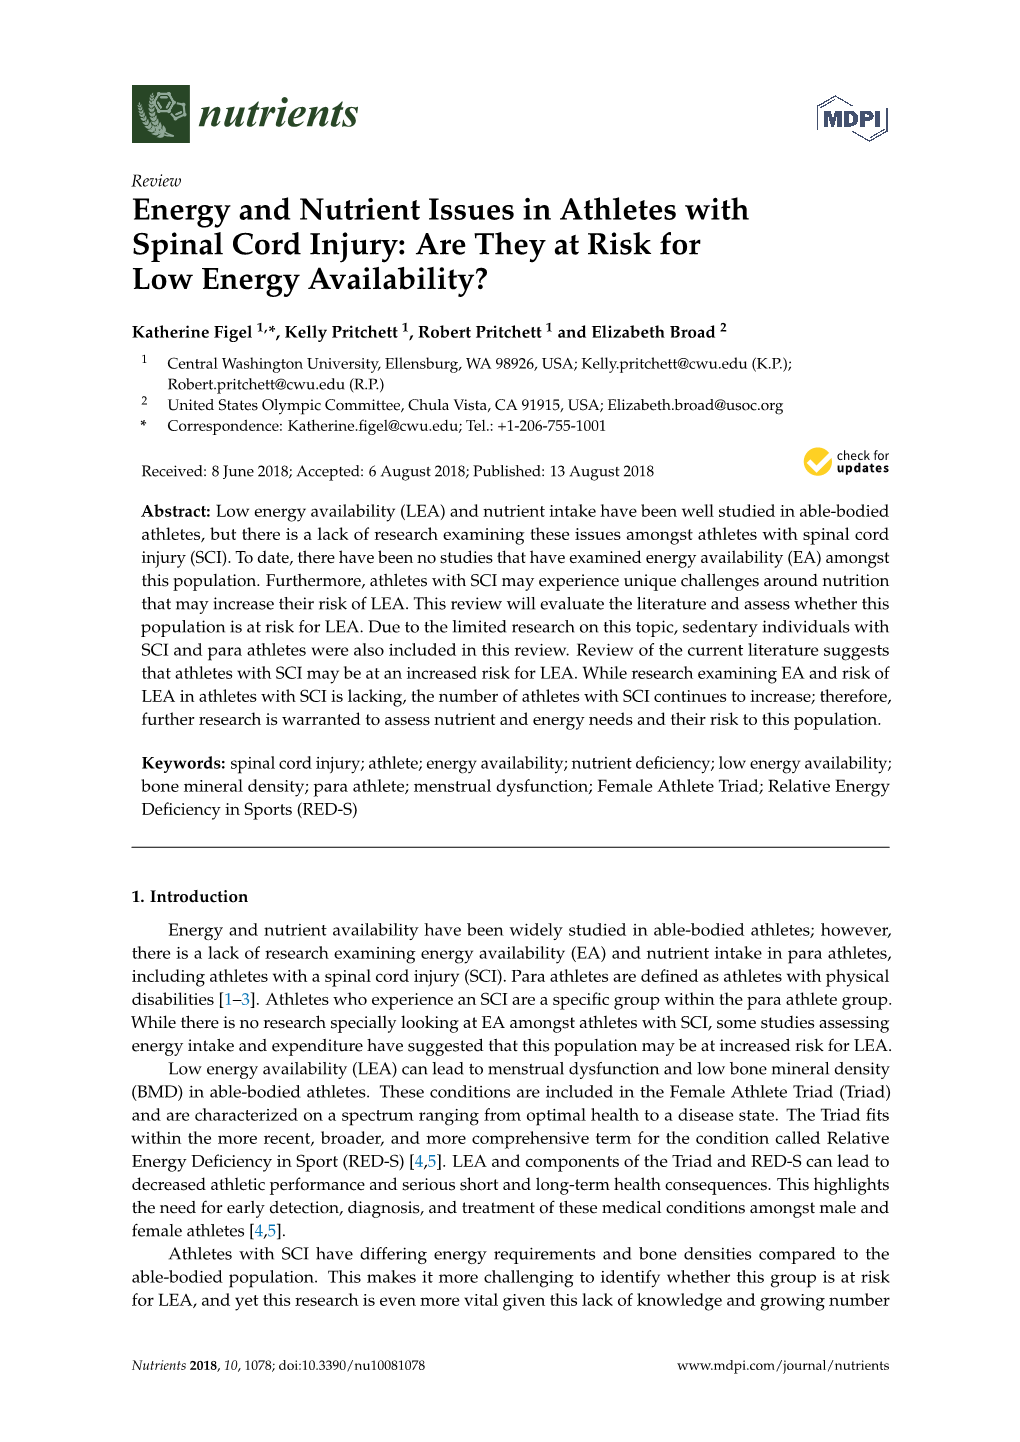 Energy and Nutrient Issues in Athletes with Spinal Cord Injury: Are They at Risk for Low Energy Availability?